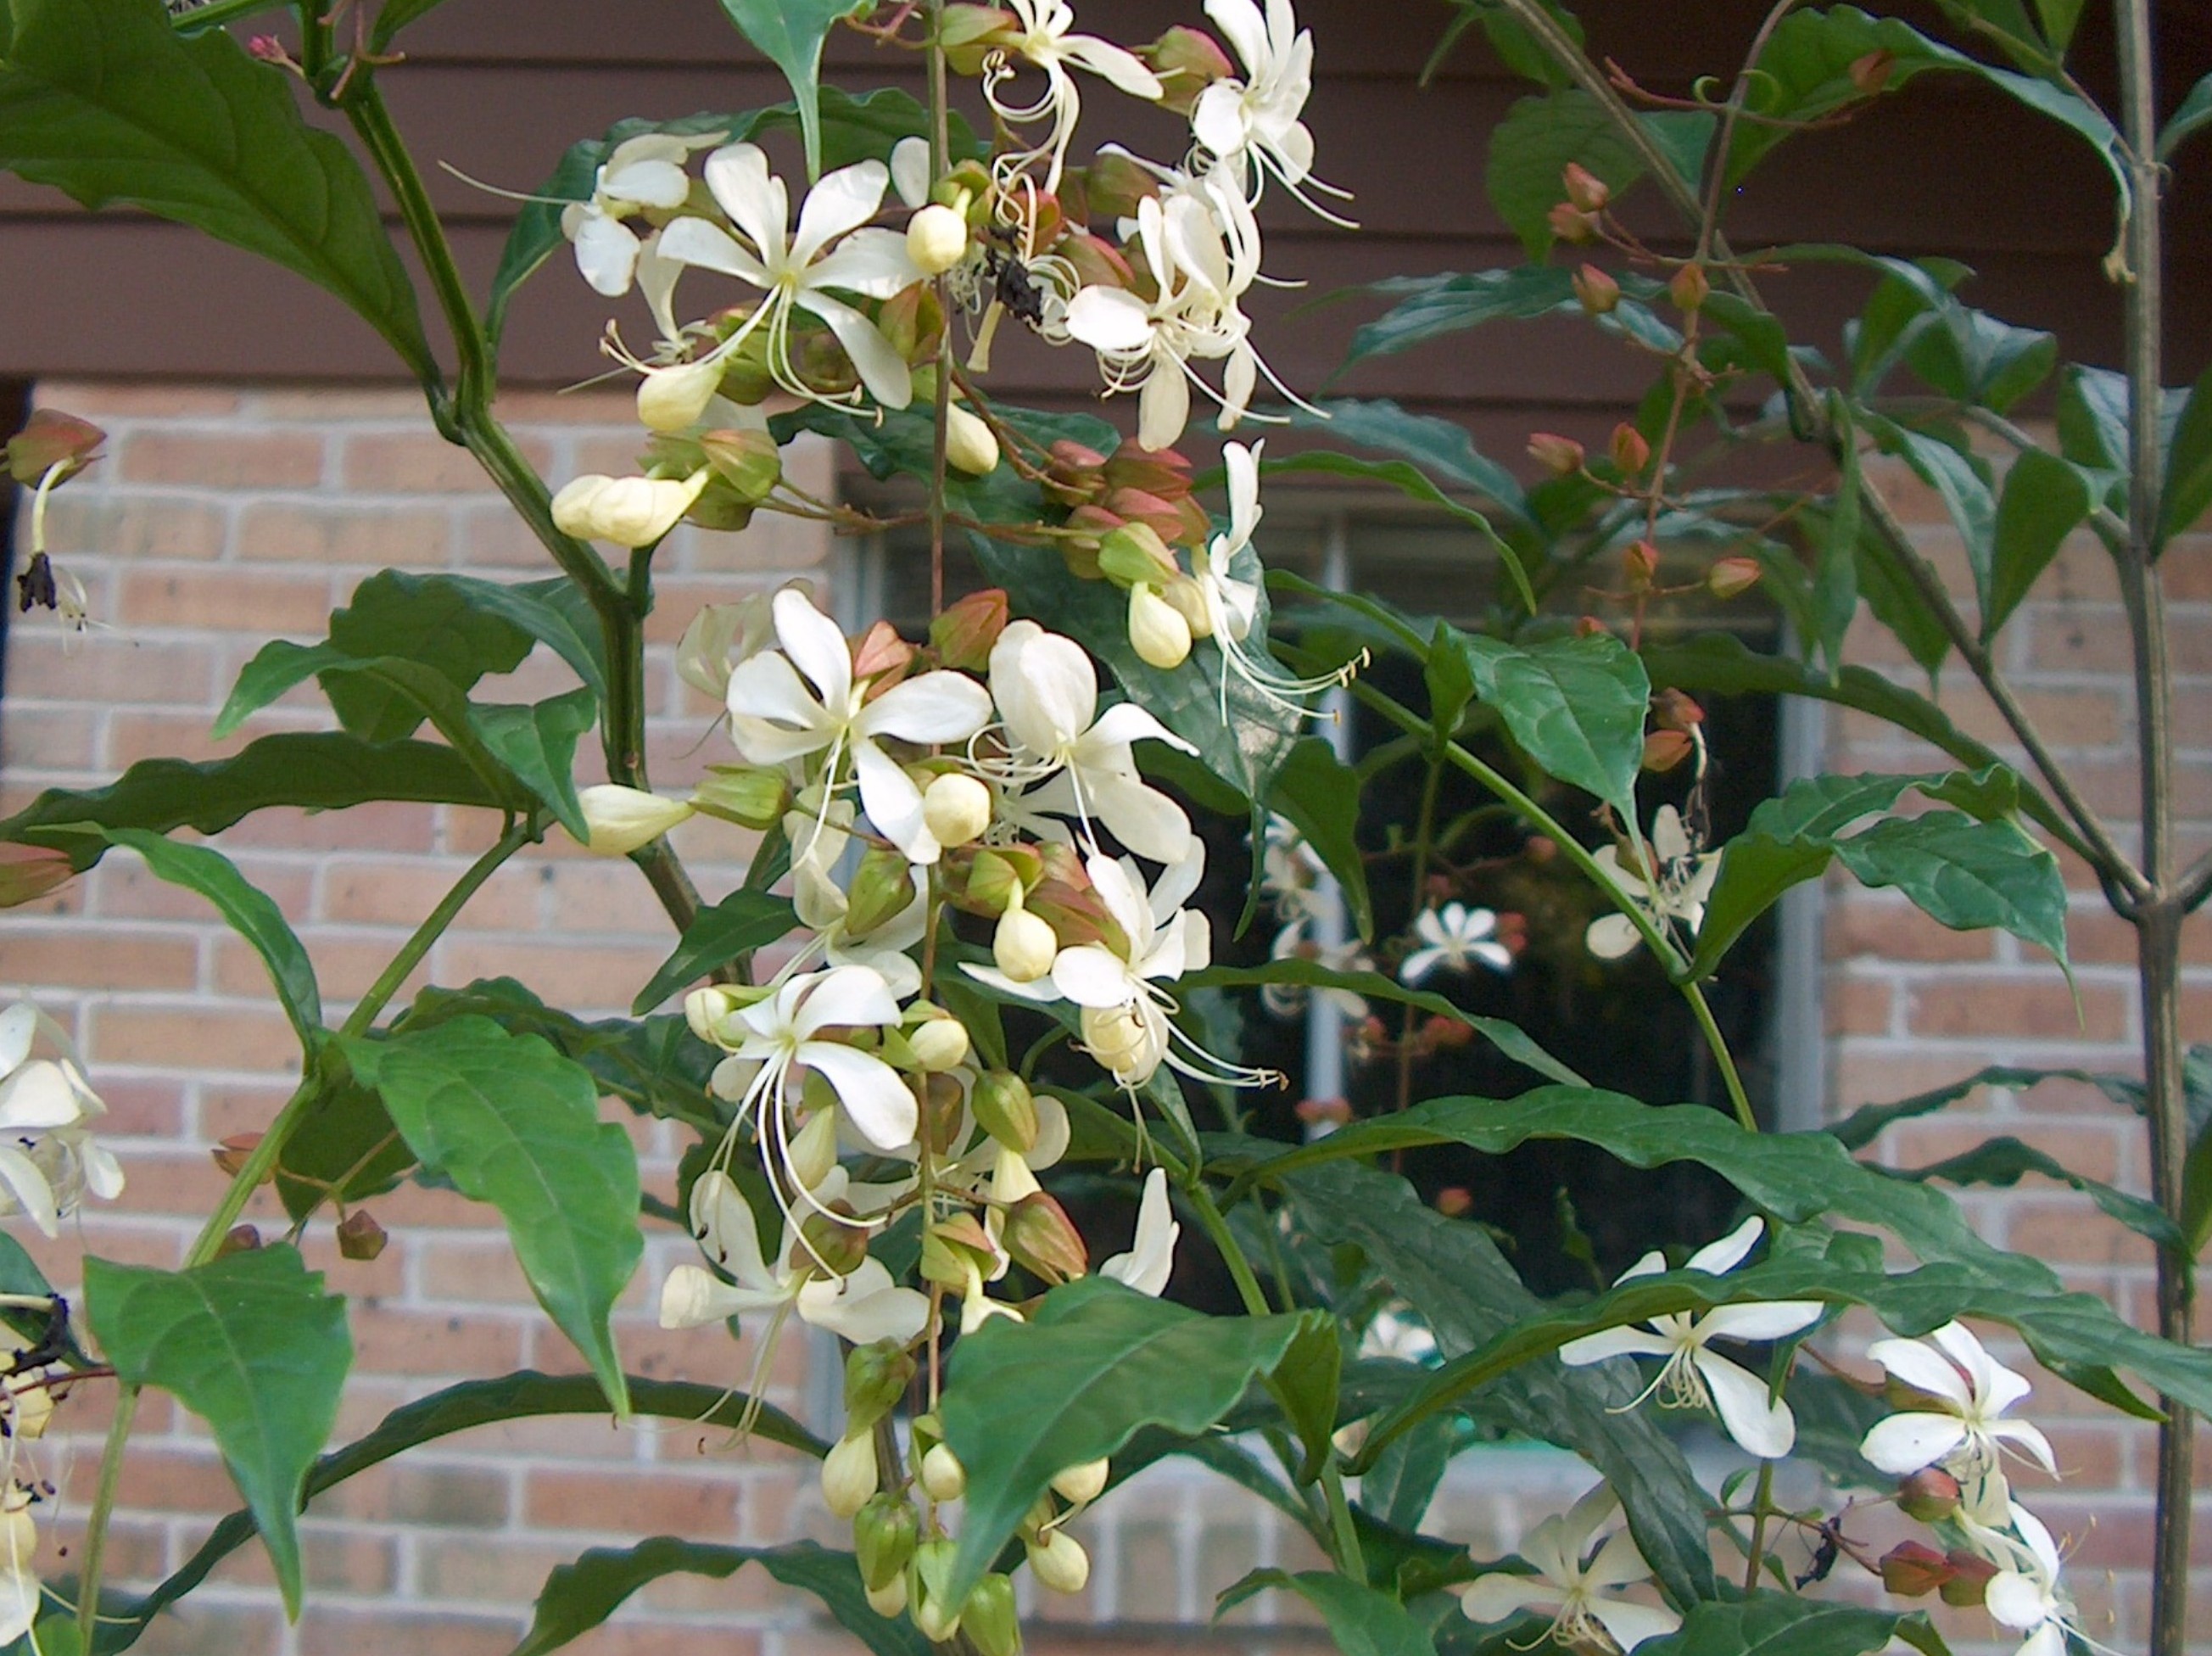 Clerodendrum nutans / Clerodendrum nutans